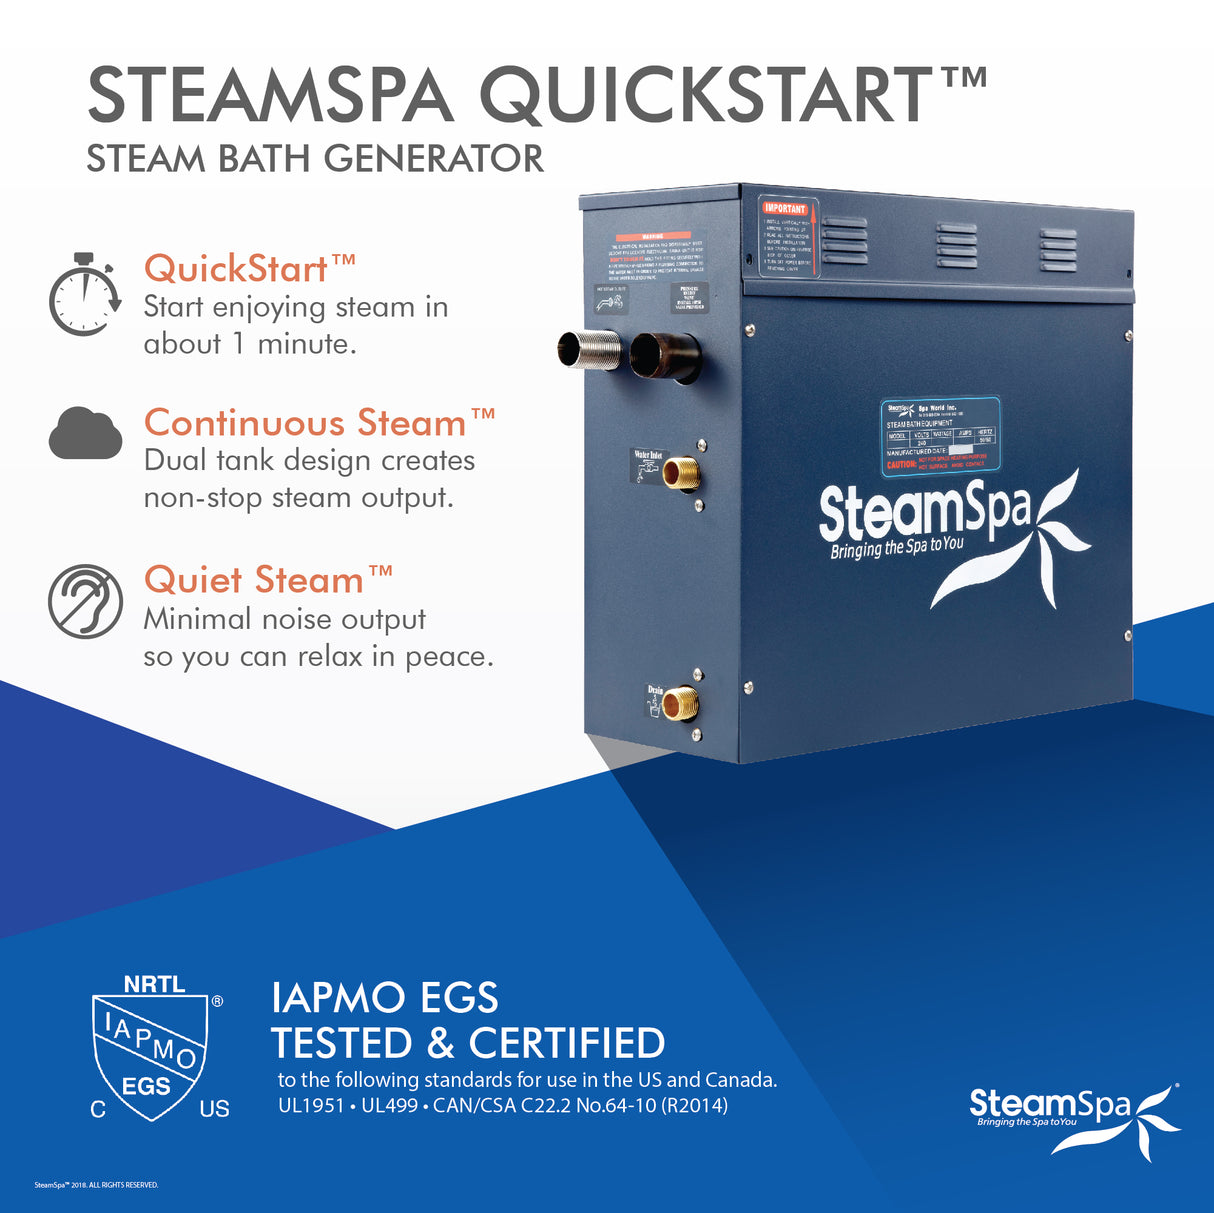 SteamSpa Royal 4.5 KW QuickStart Acu-Steam Bath Generator Package with Built-in Auto Drain in Brushed Nickel RYT450BN-A